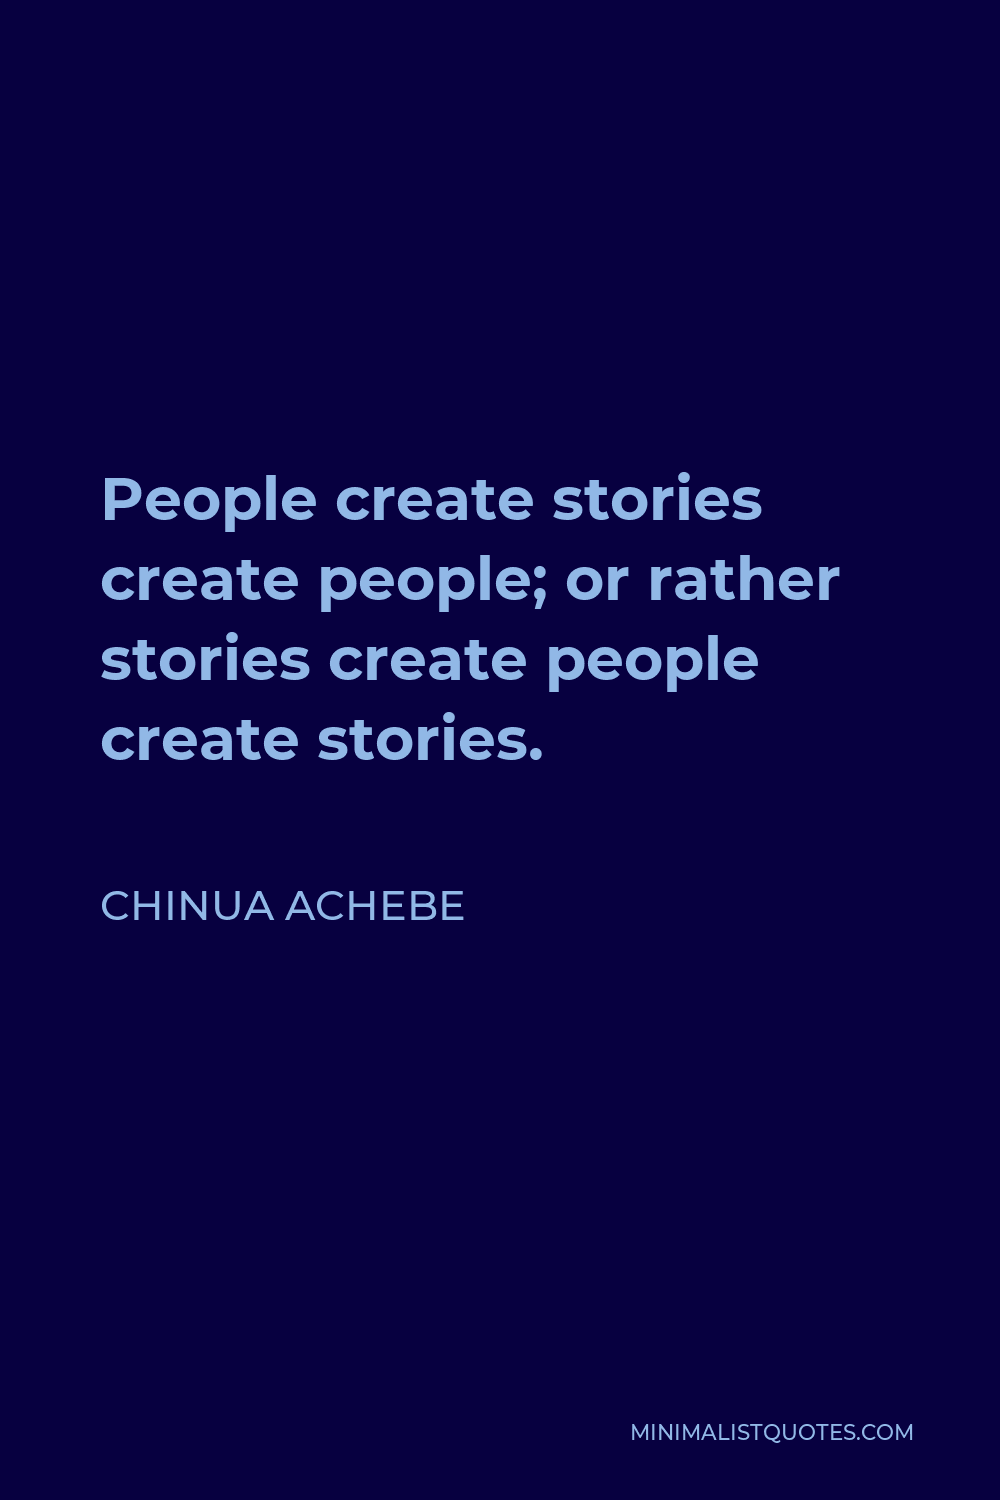 Chinua Achebe Quote - People create stories create people; or rather stories create people create stories.